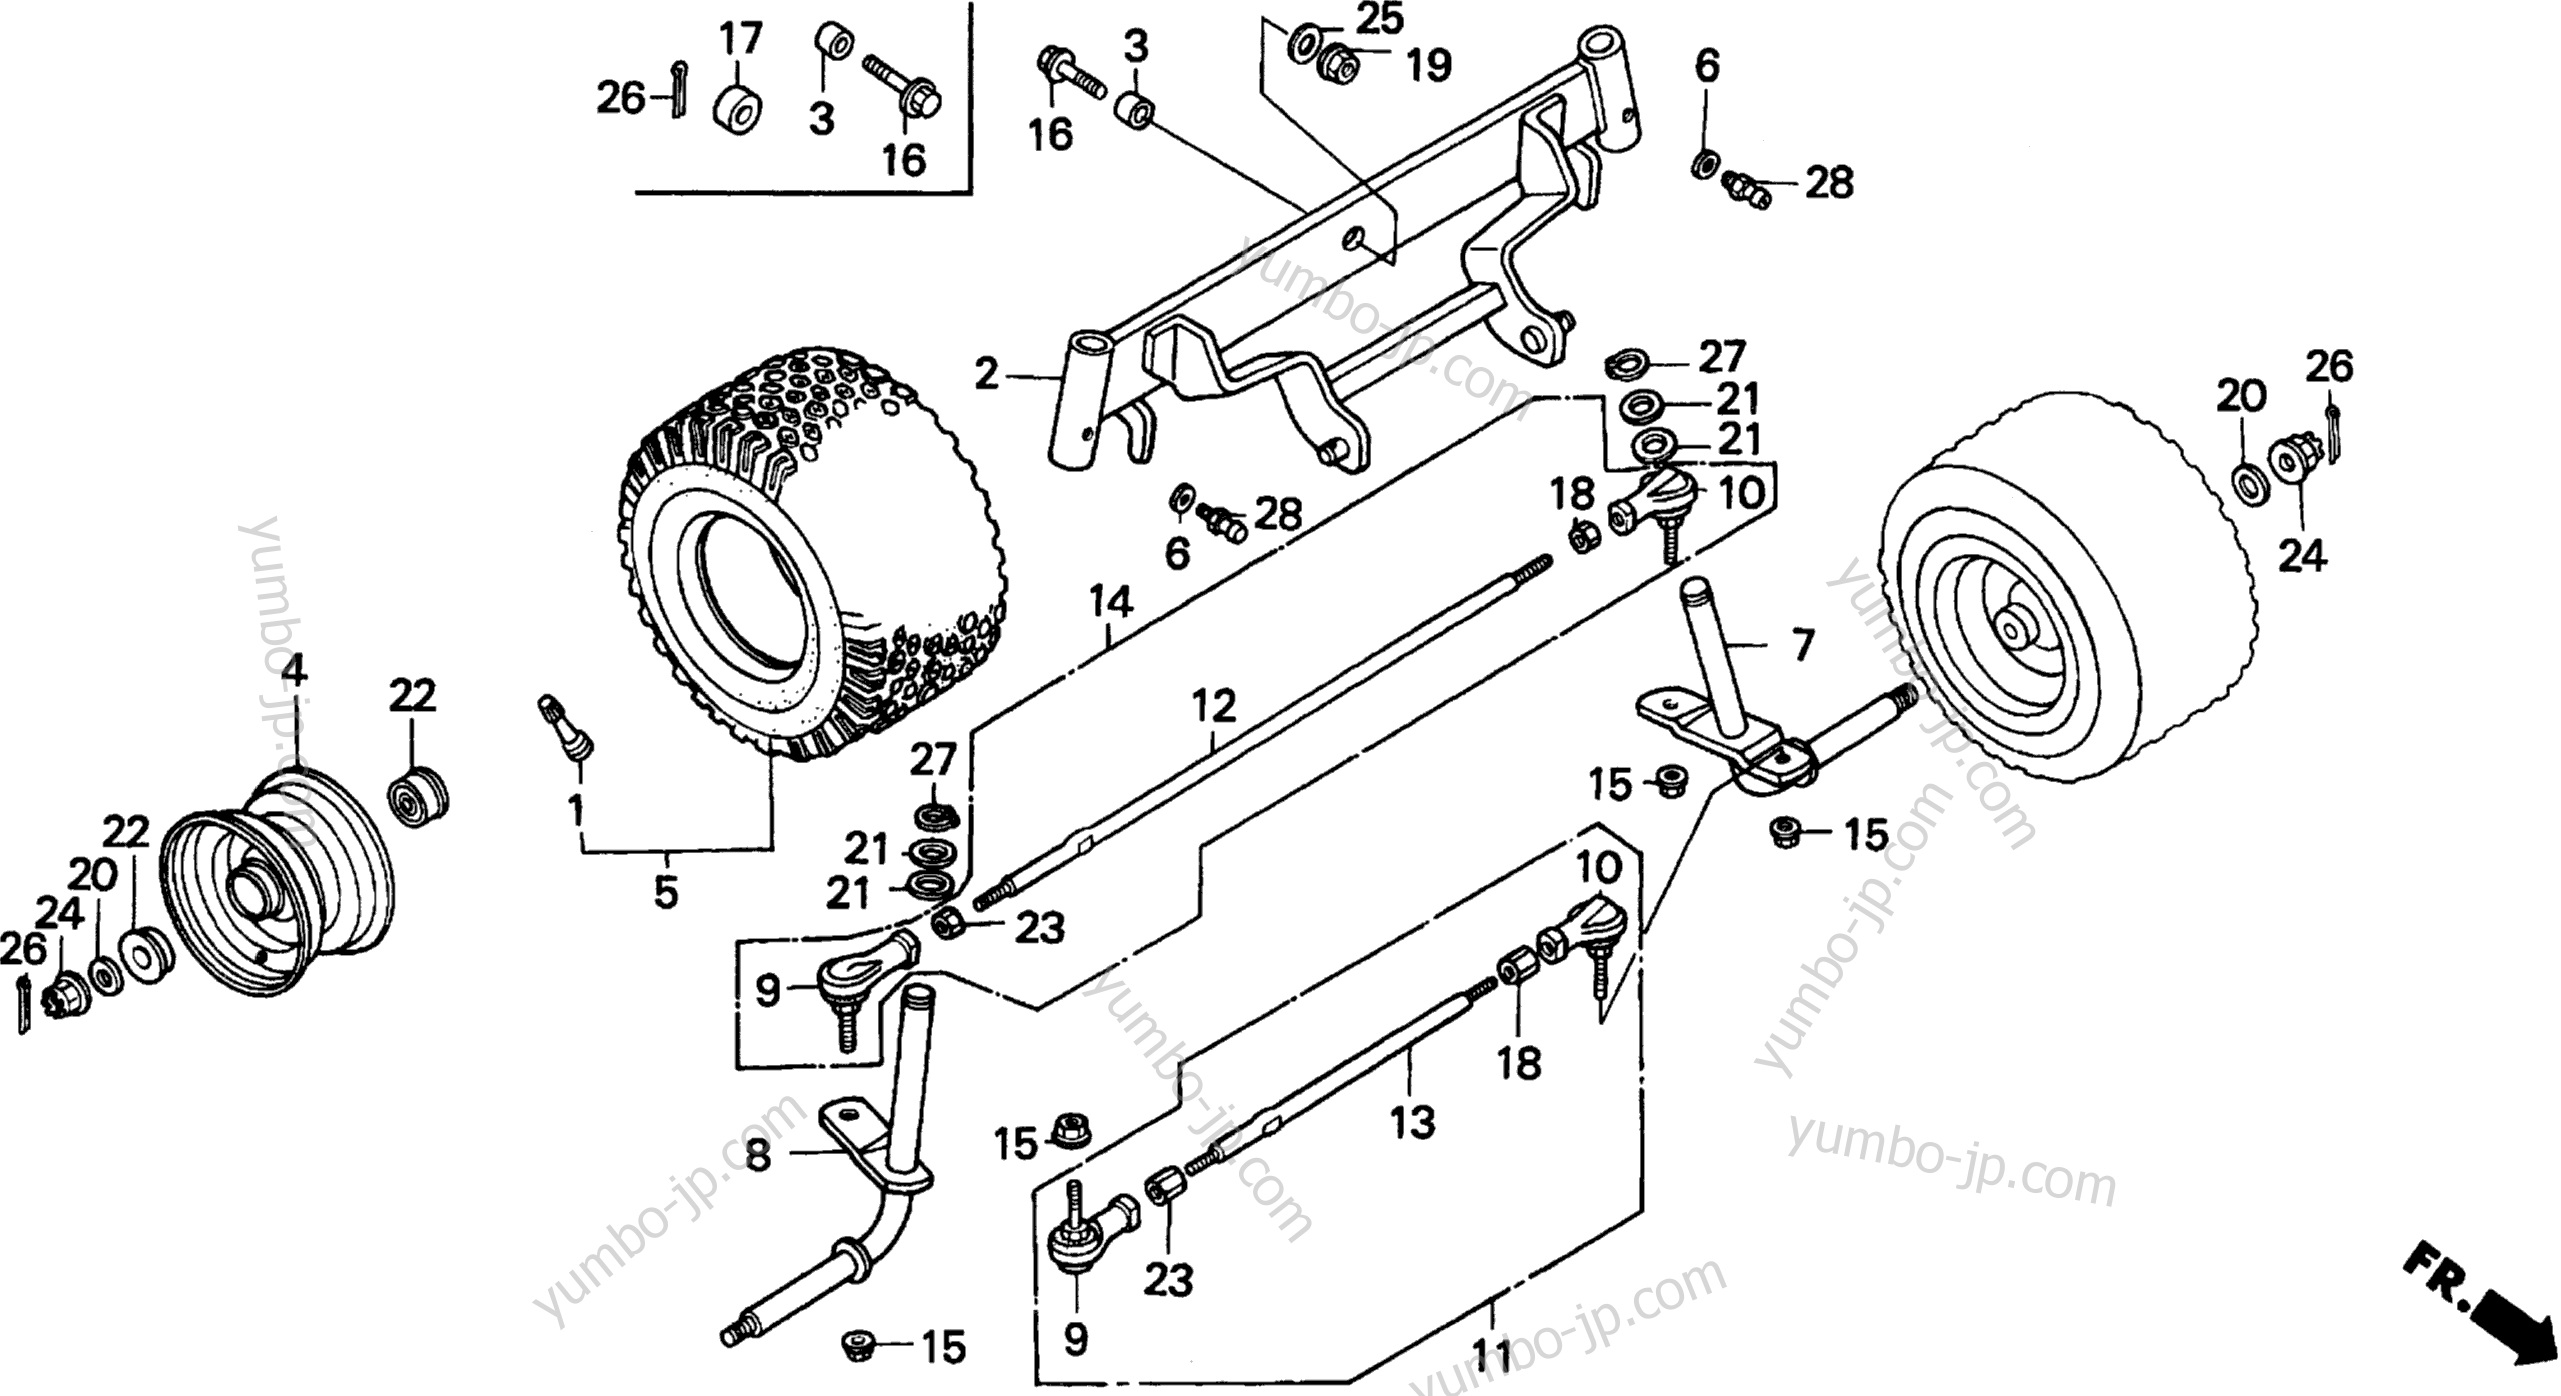 FRONT AXLE / FRONT WHEEL for lawn mowers HONDA H3011 SA 